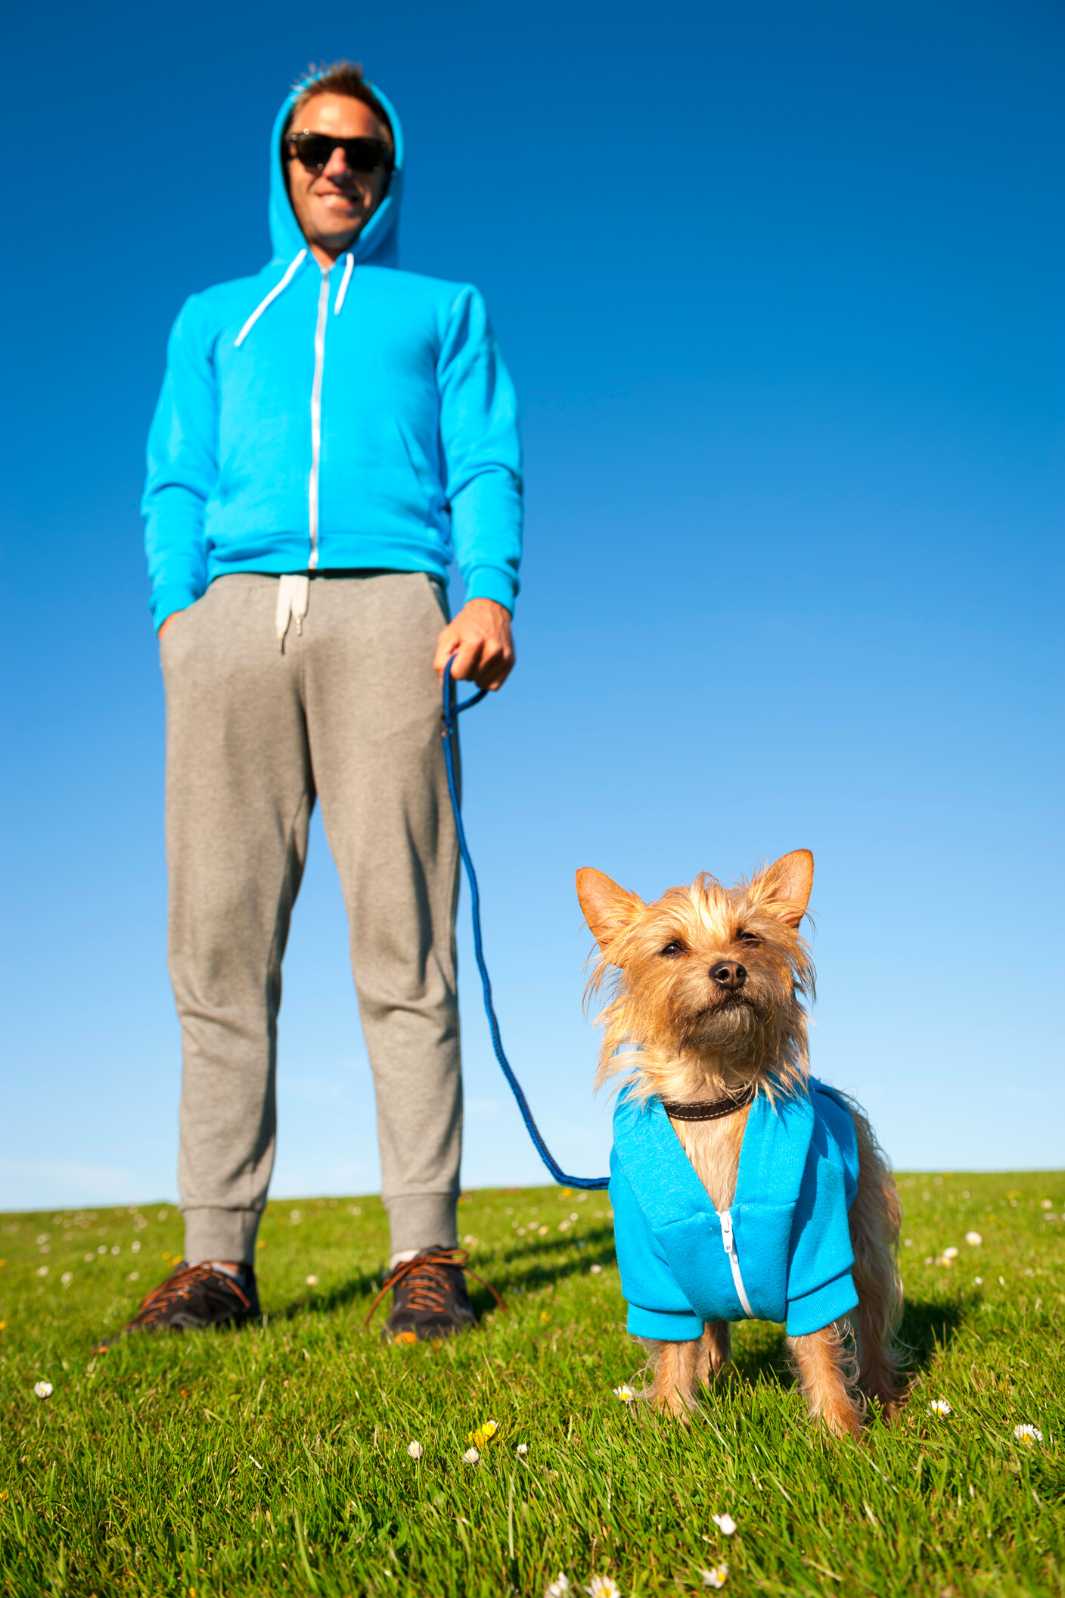 Dog owner and their small dog standing outside on a blue sky summer day, wearing matching blue zip up hoodies.